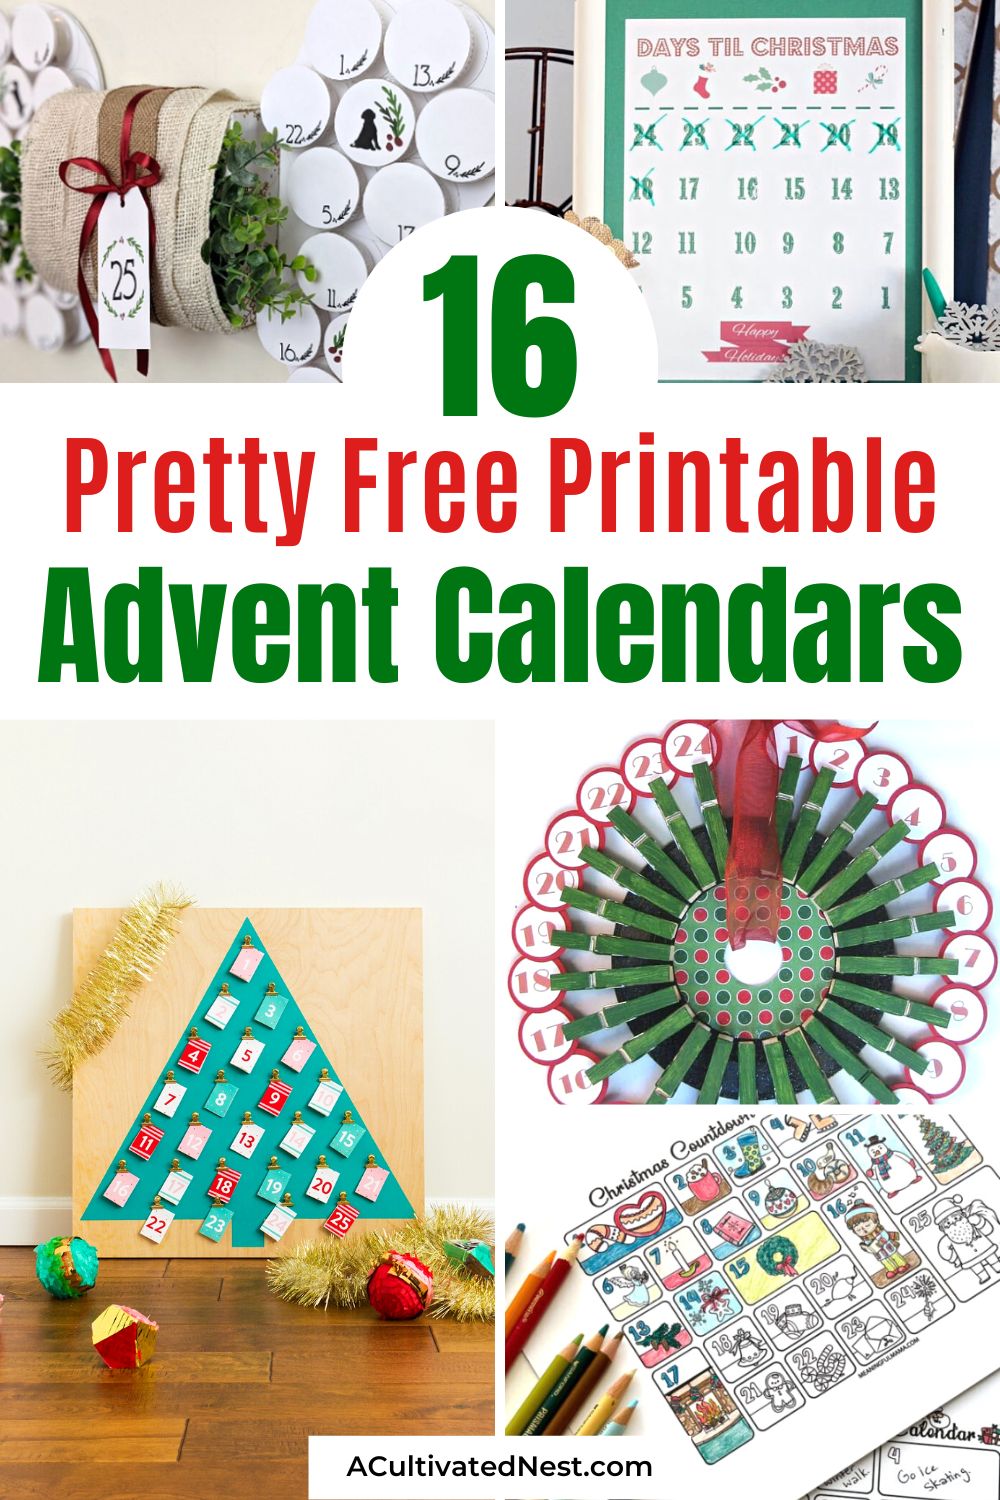 16 Beautiful Free Printable Advent Calendars- Dive into the joy of the holidays with our curated list of beautiful free printable advent calendars! Add a personalized touch to your Christmas countdown and embrace the convenience of instant access. Download, print, and make this season truly special! | #adventCalendars #printables #ChristmasPrintables #HolidayDecor #ACultivatedNest